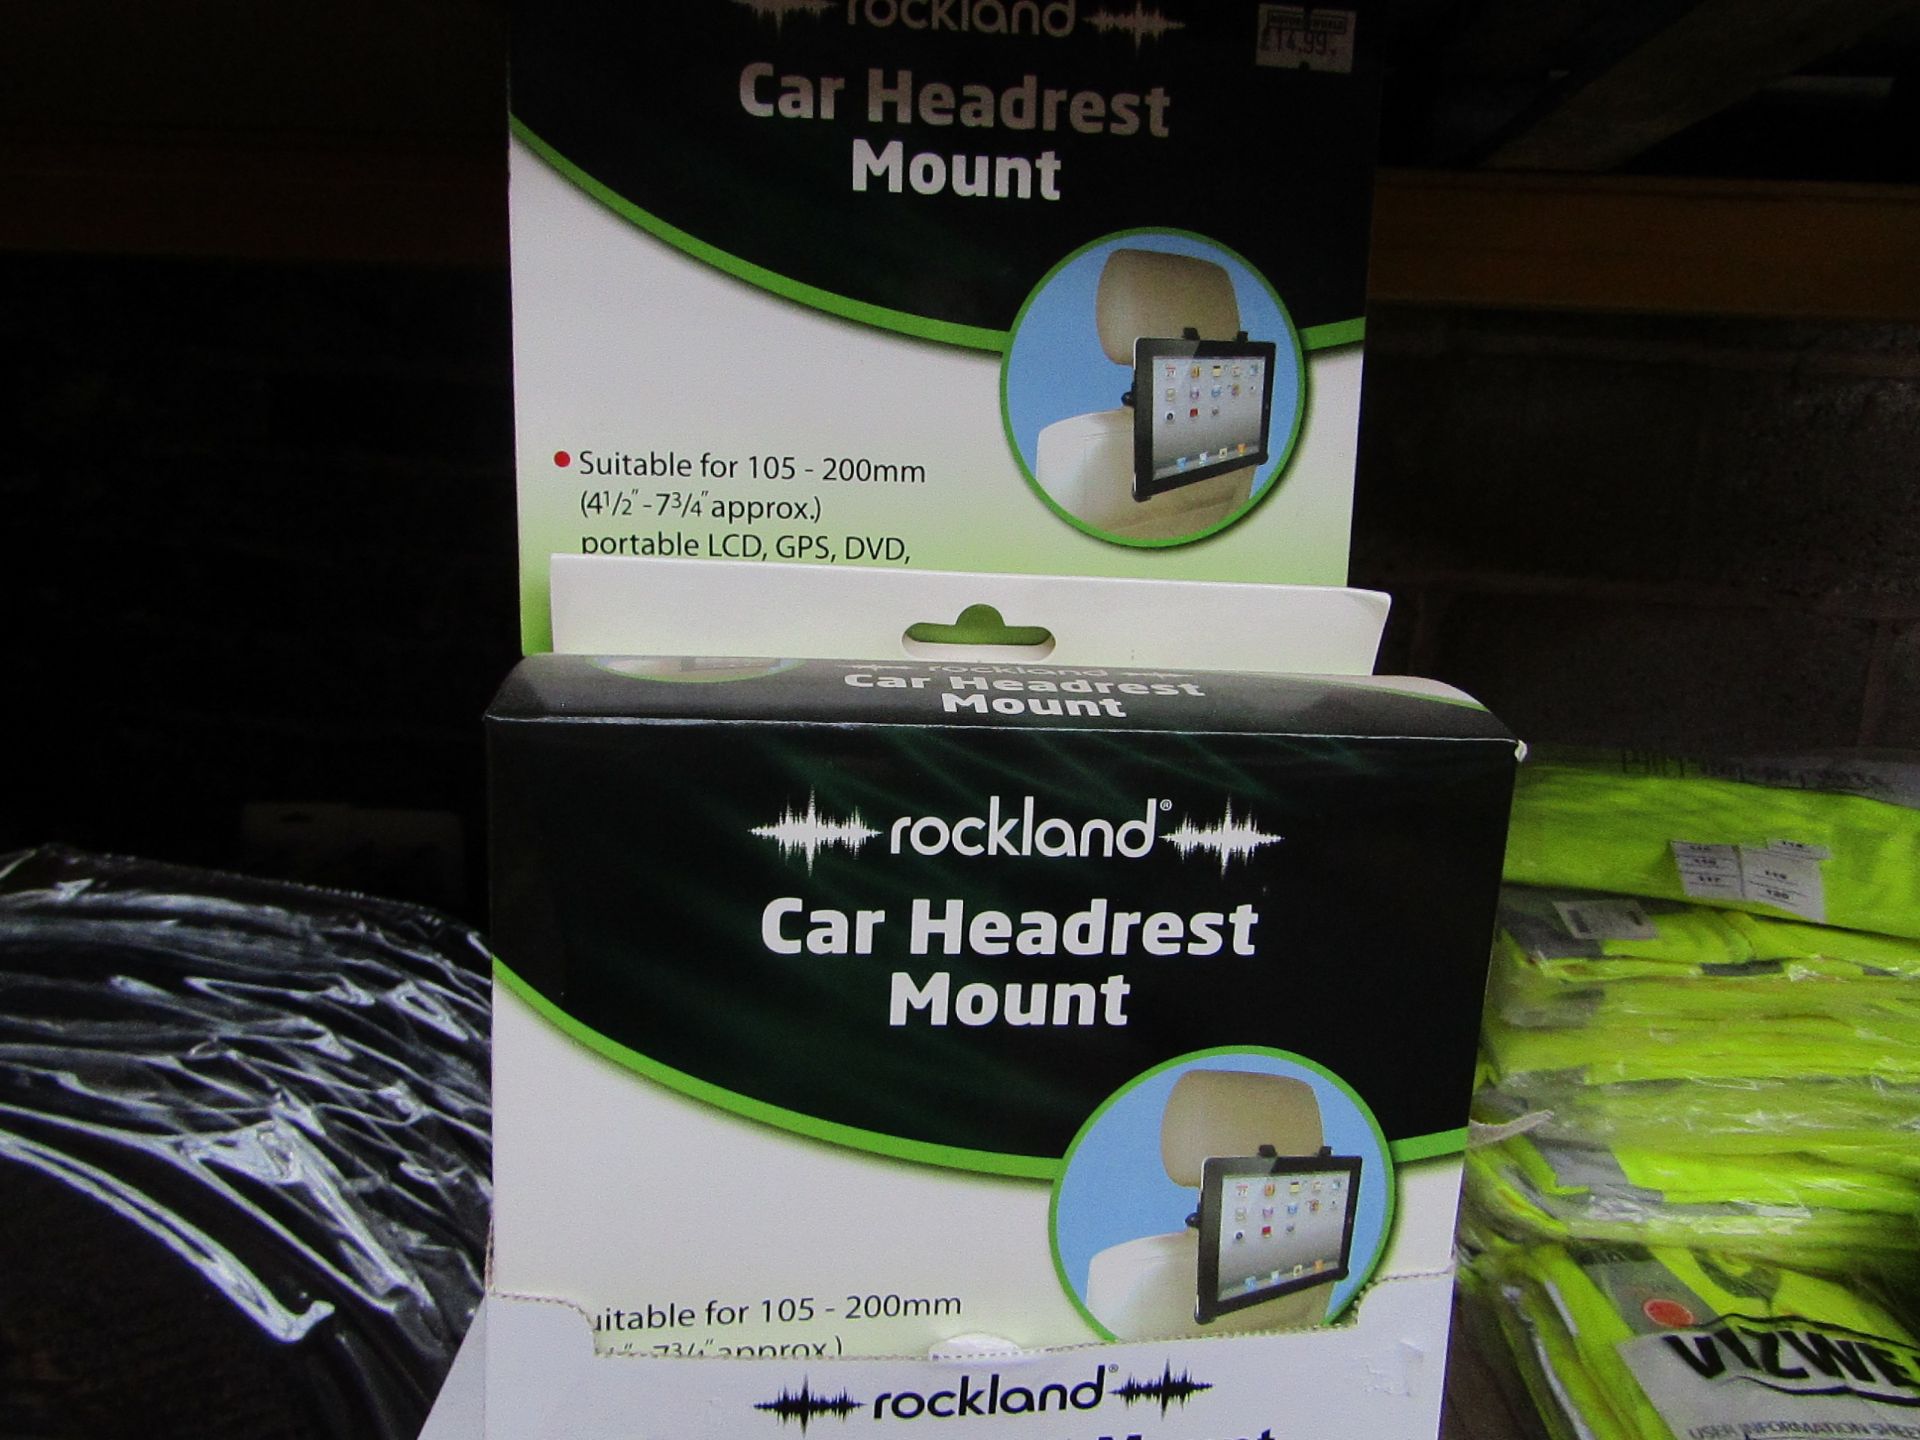 4x Rockland Car Head rest mounts suitable for Tablets and devices up to 7" - New.